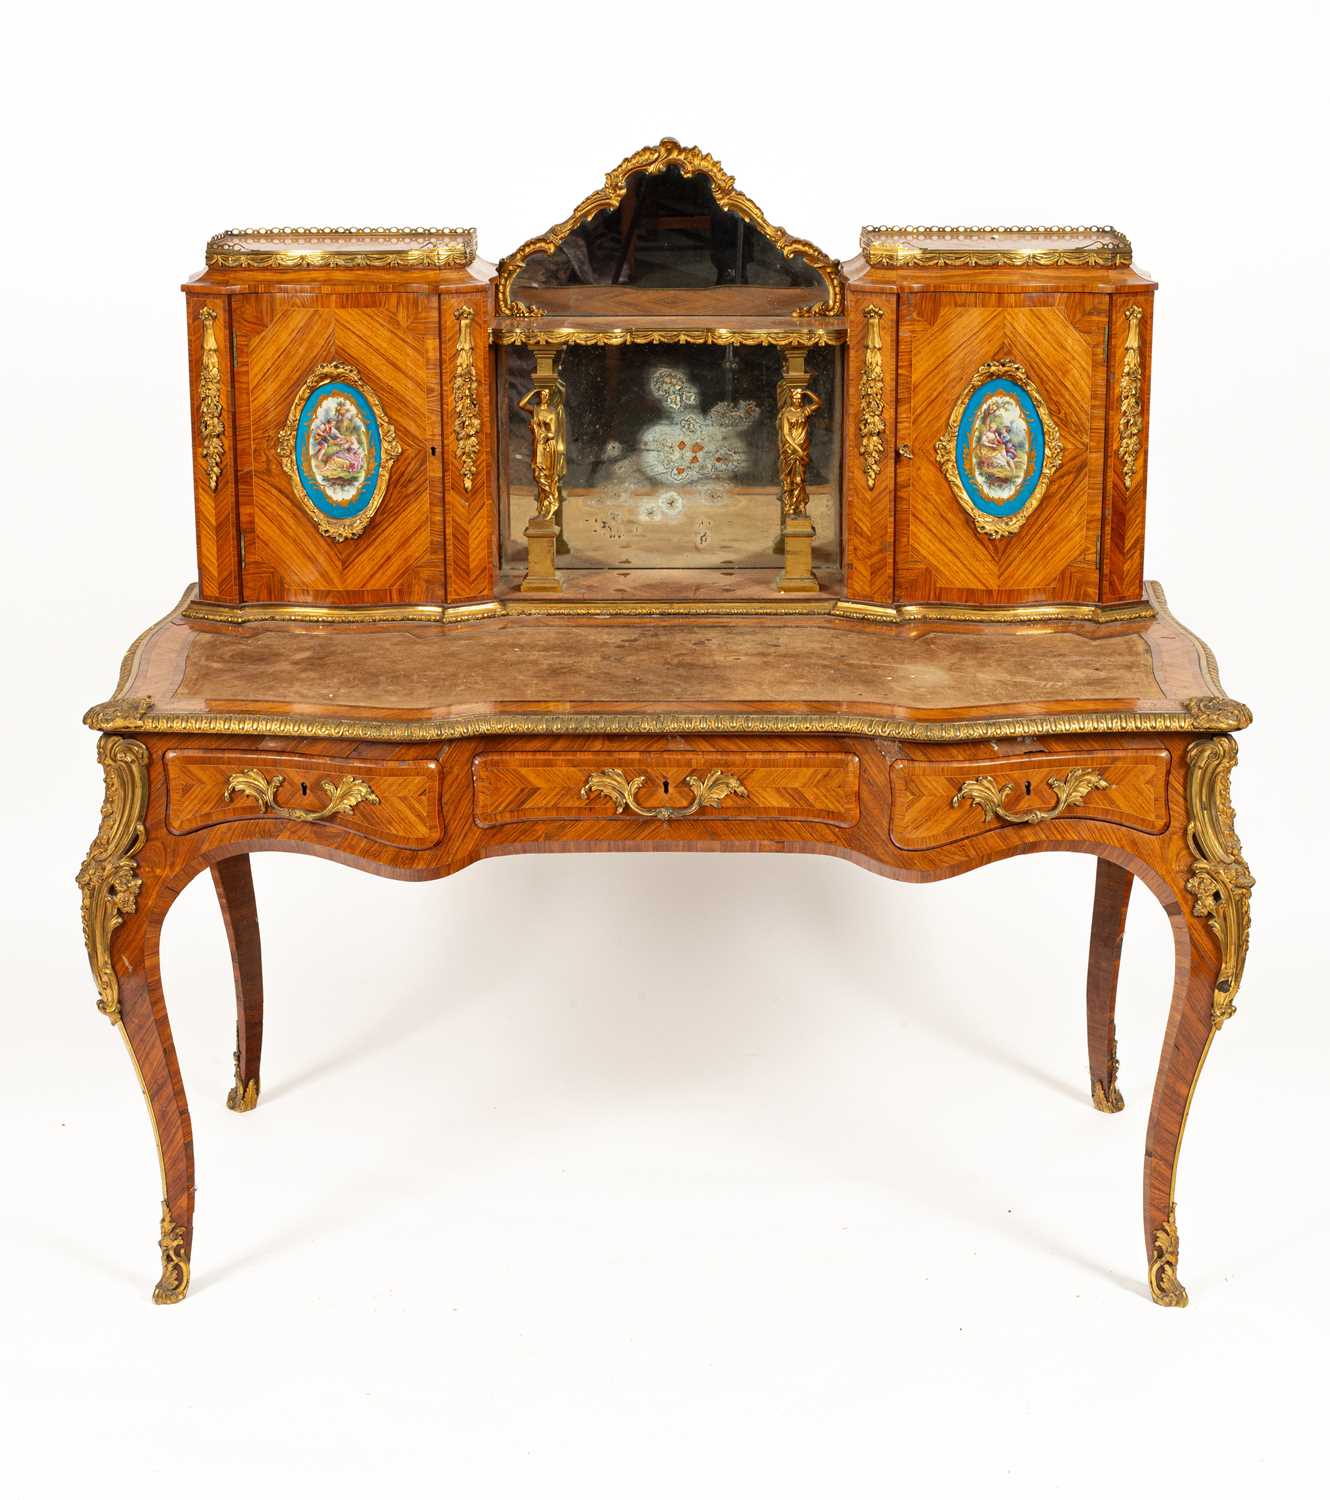 A Victorian ormolu mounted tulipwood and kingwood desk in the Louis XV style - Image 2 of 38